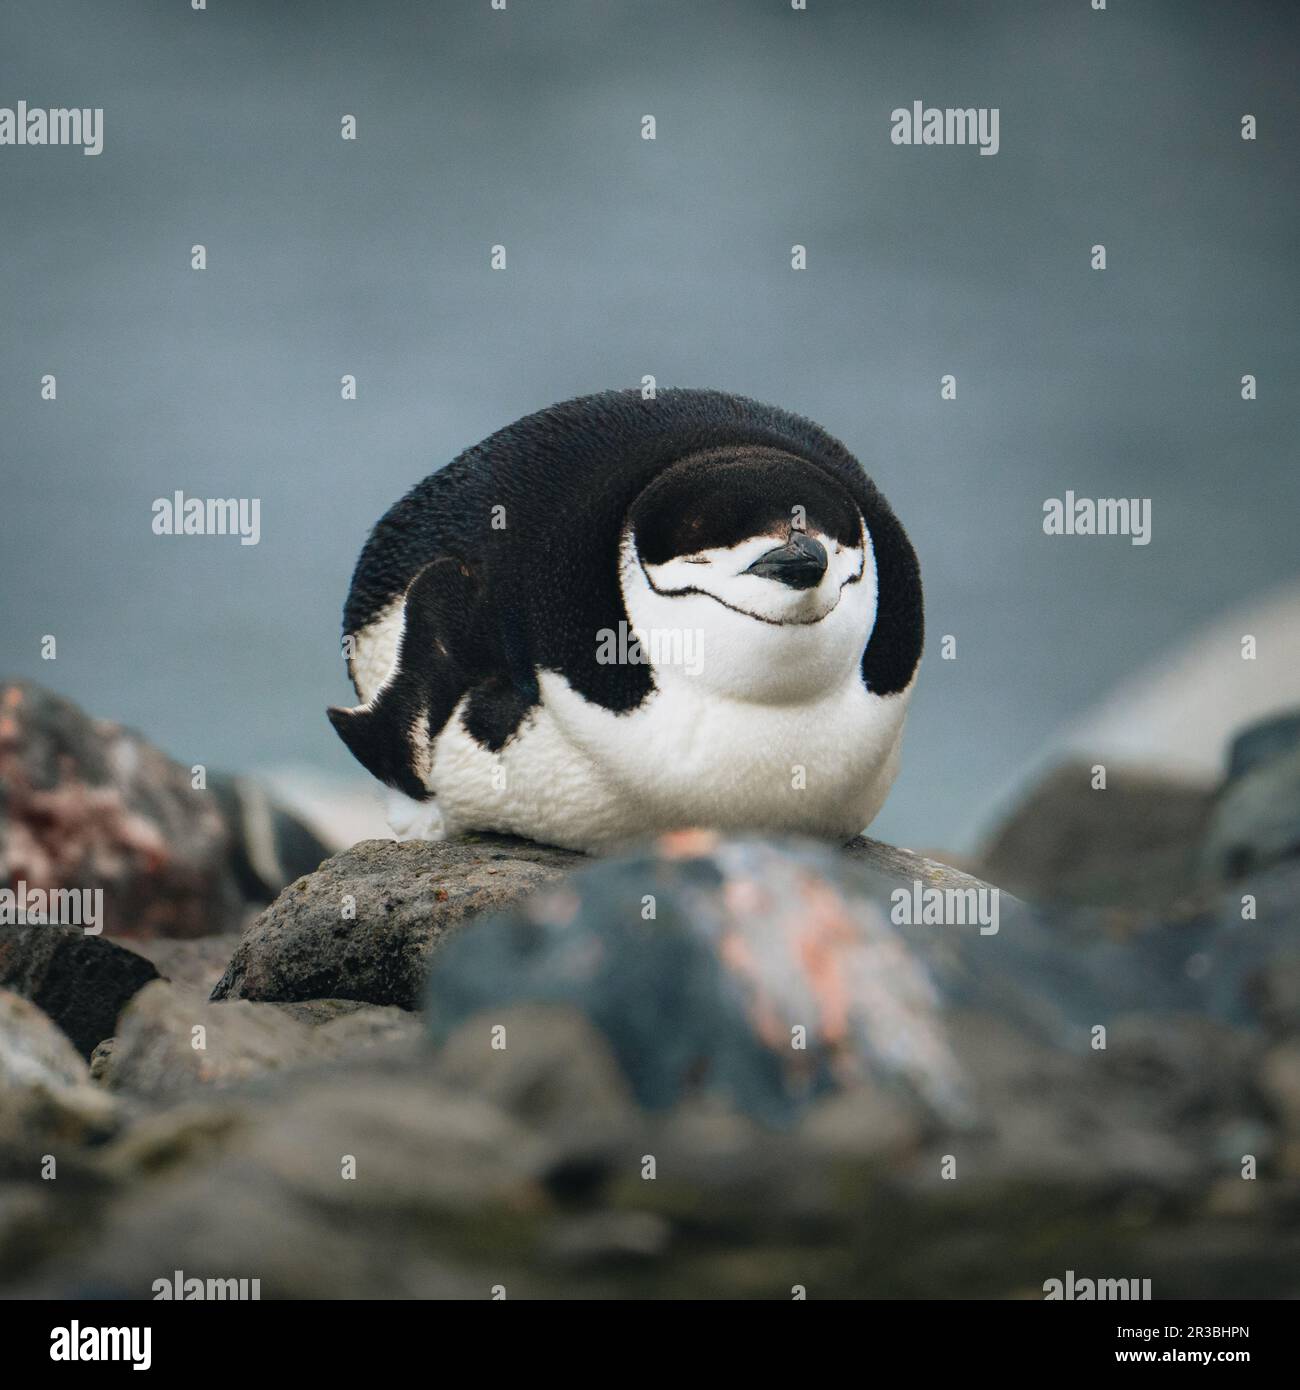 Sleeping Chinstrap penguin on a rocky beach in Antarctica. Eyes closed and looking funny. Stock Photo